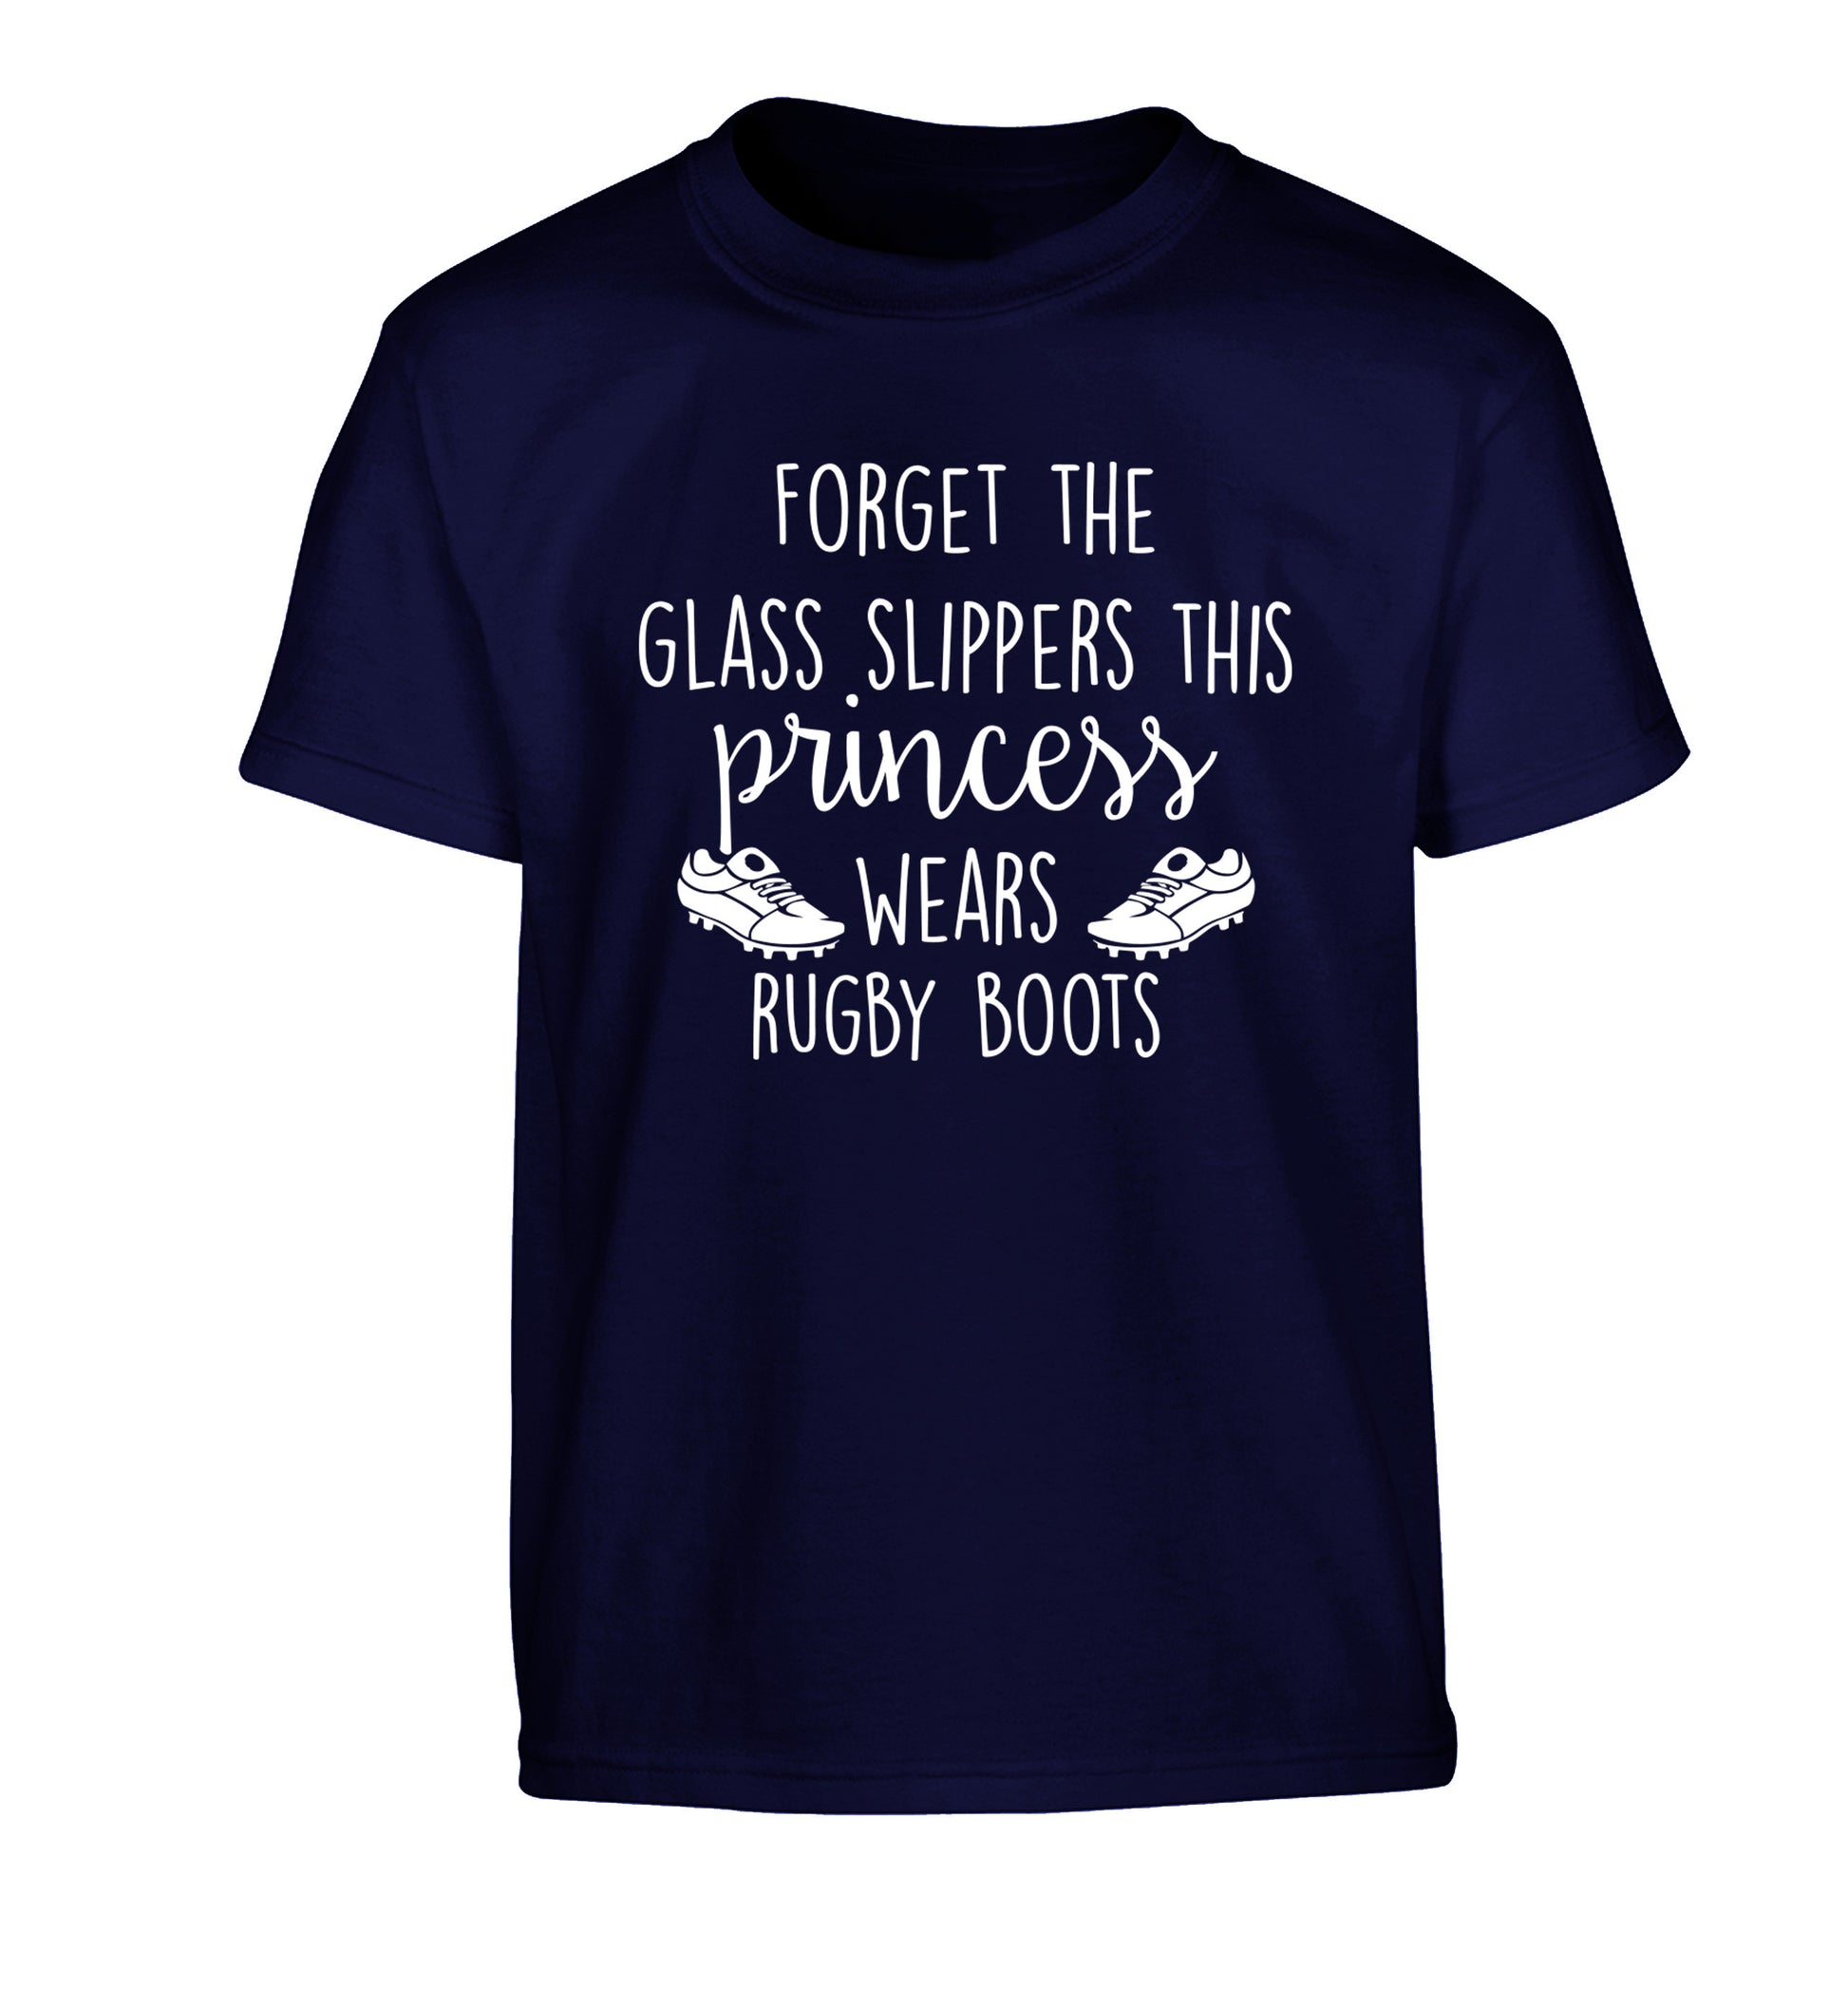 Forget the glass slippers this princess wears rugby boots Children's navy Tshirt 12-14 Years